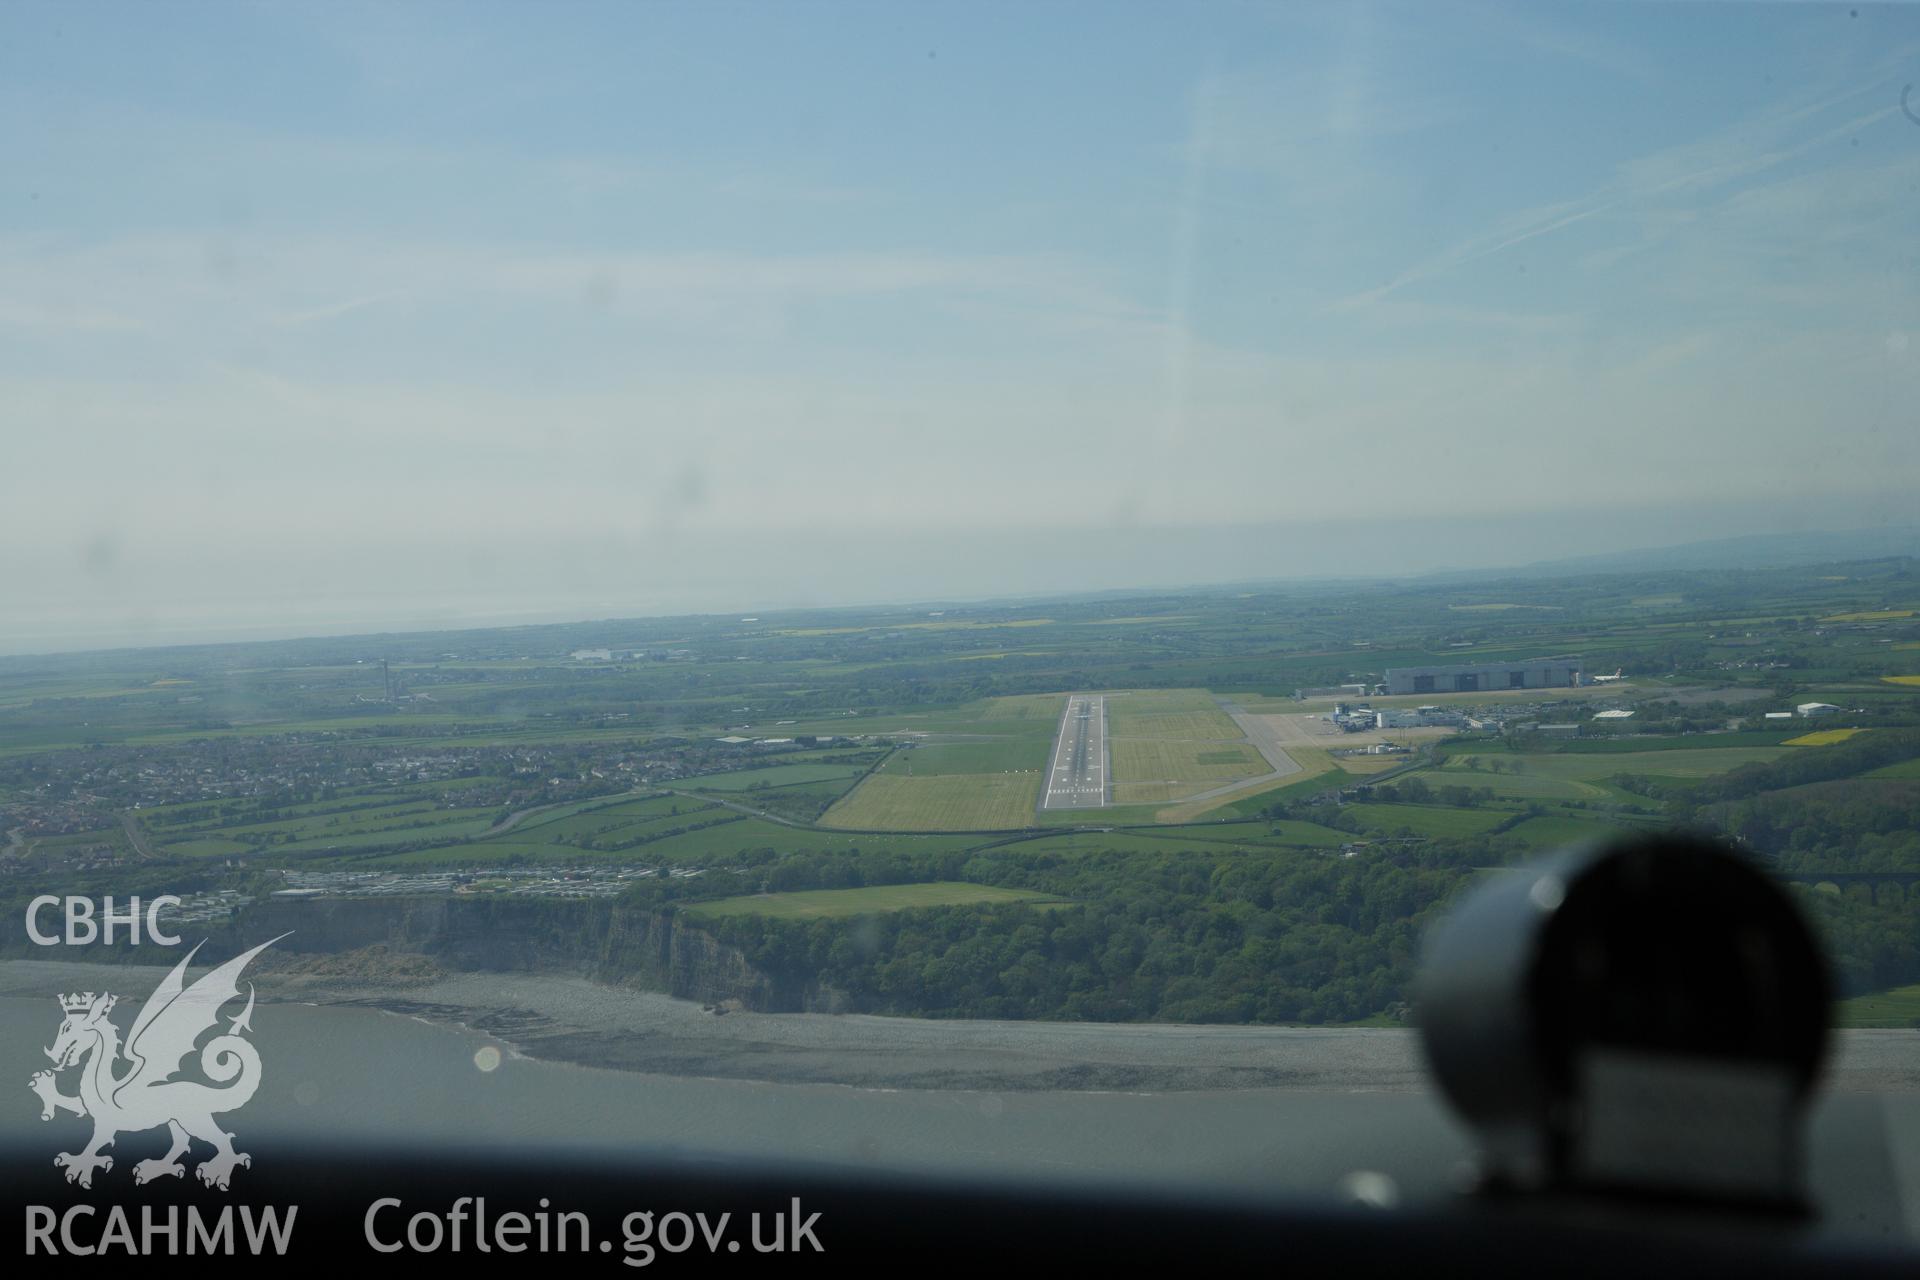 RCAHMW colour oblique photograph of Cardiff International Airport, pilot's view of runway approach. Taken by Toby Driver on 22/05/2012.